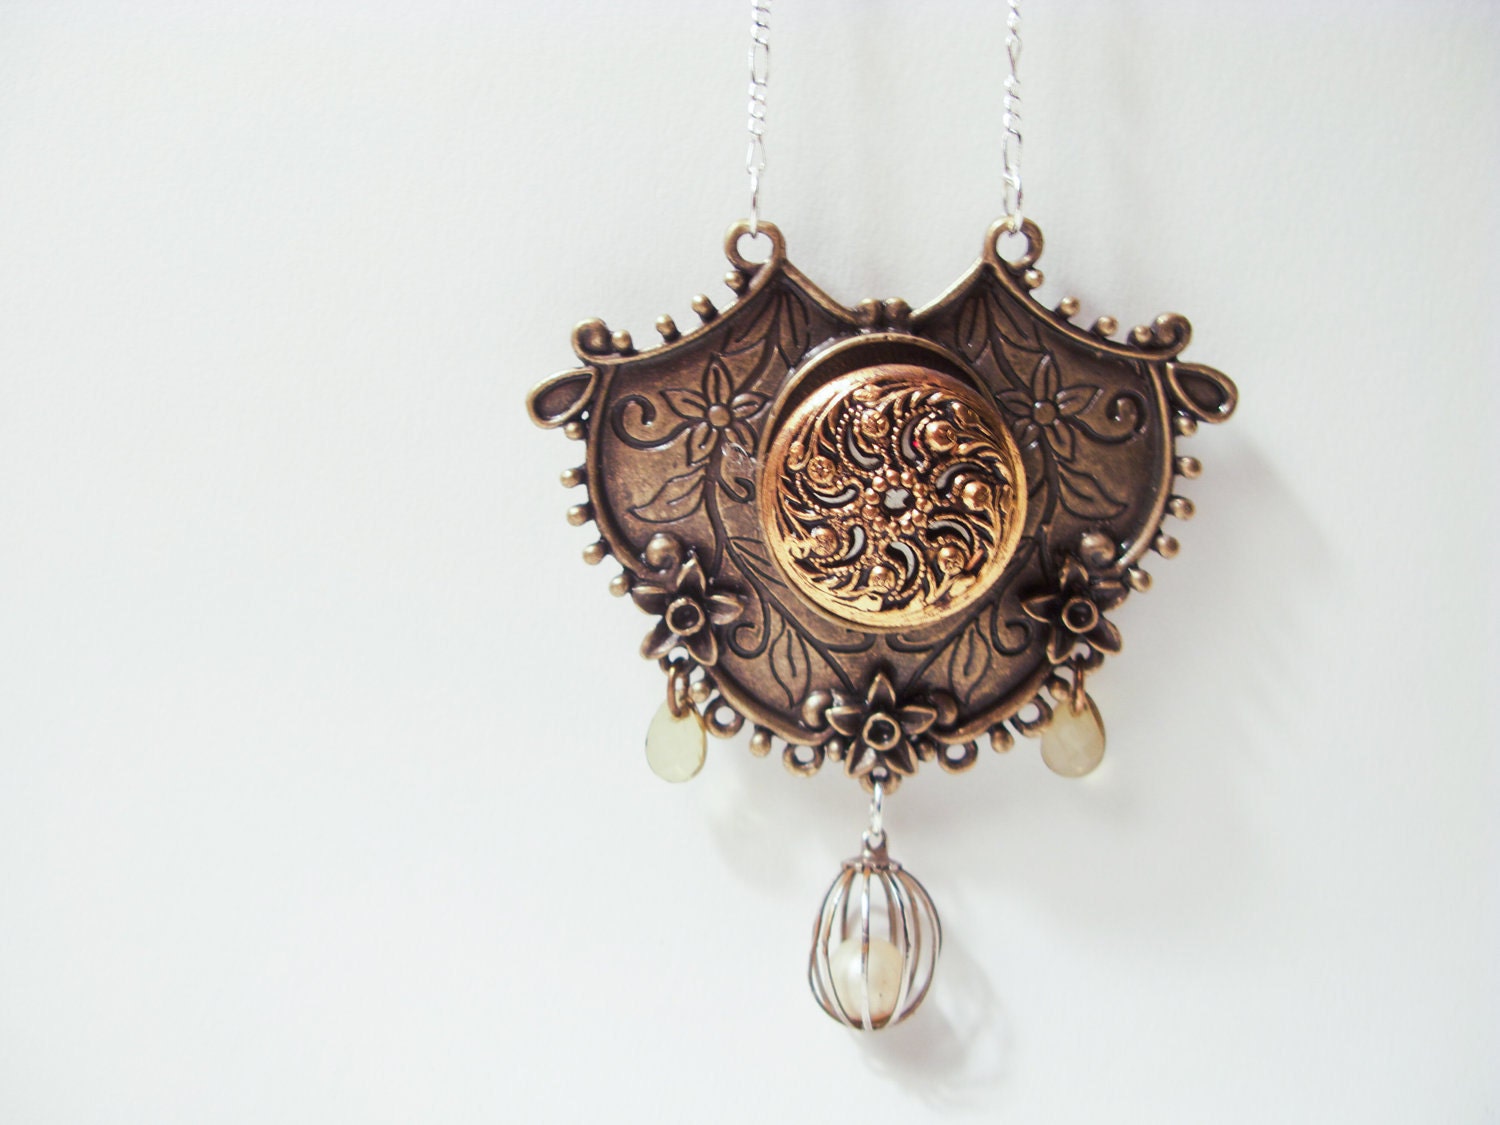 OOAK BOHO VICTORIAN: Ornate Statement Mixed Media Necklace In Brass With Antique Button - ephemeralpillages